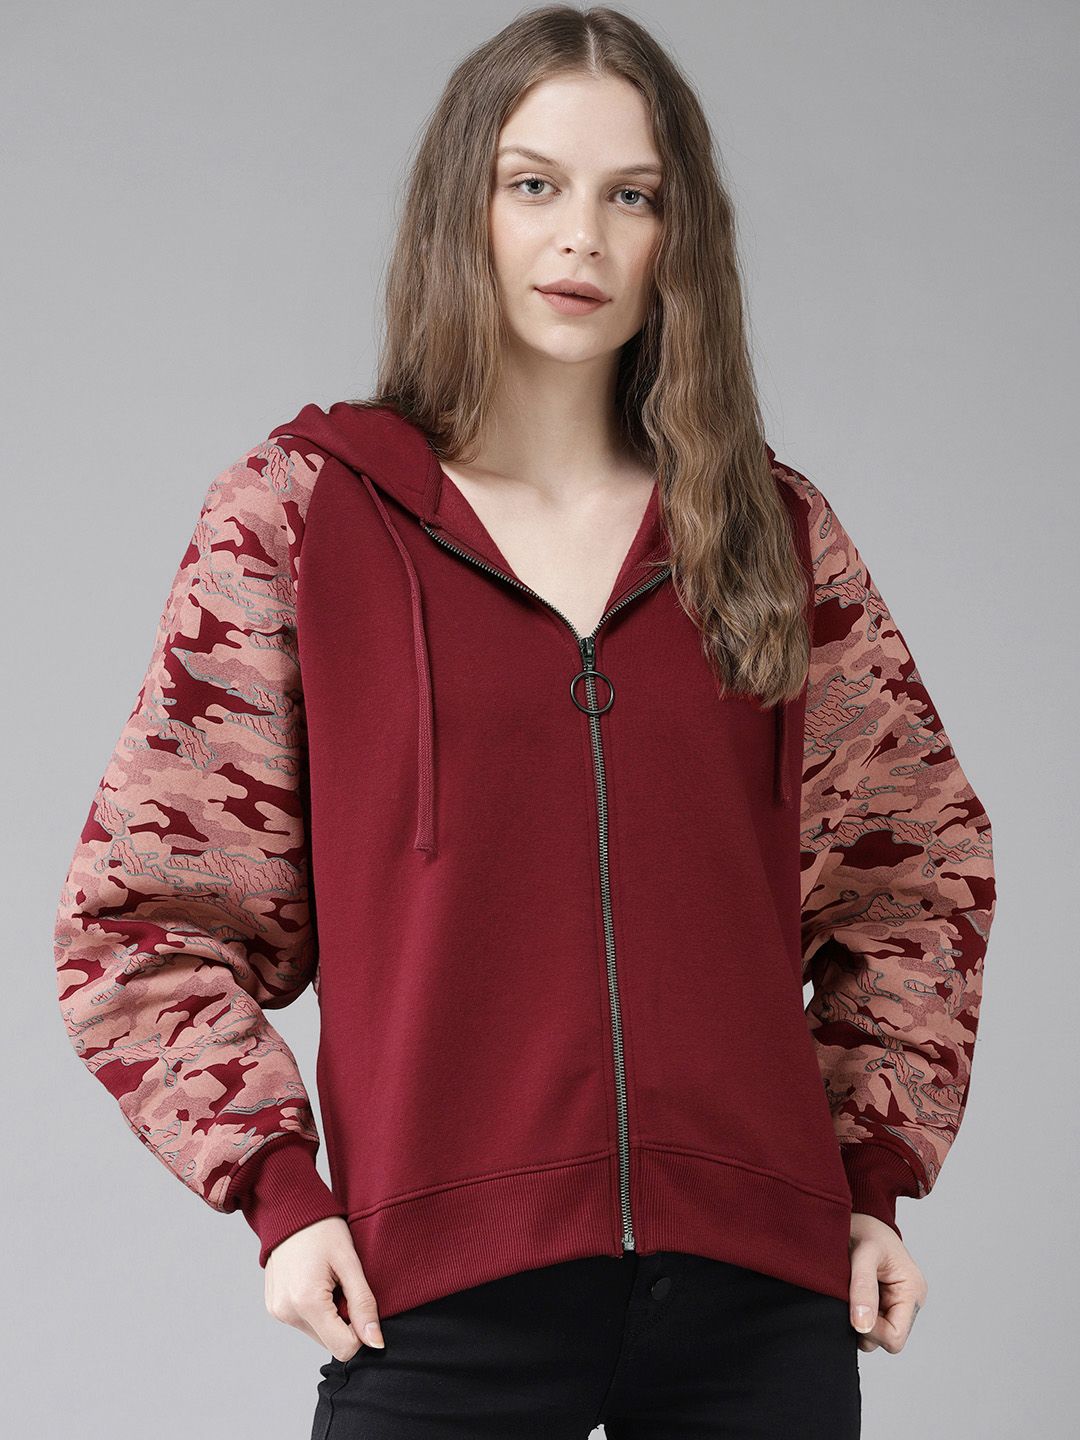 The Roadster Lifestyle Co Women Maroon Solid Hooded Sweatshirt Price in India